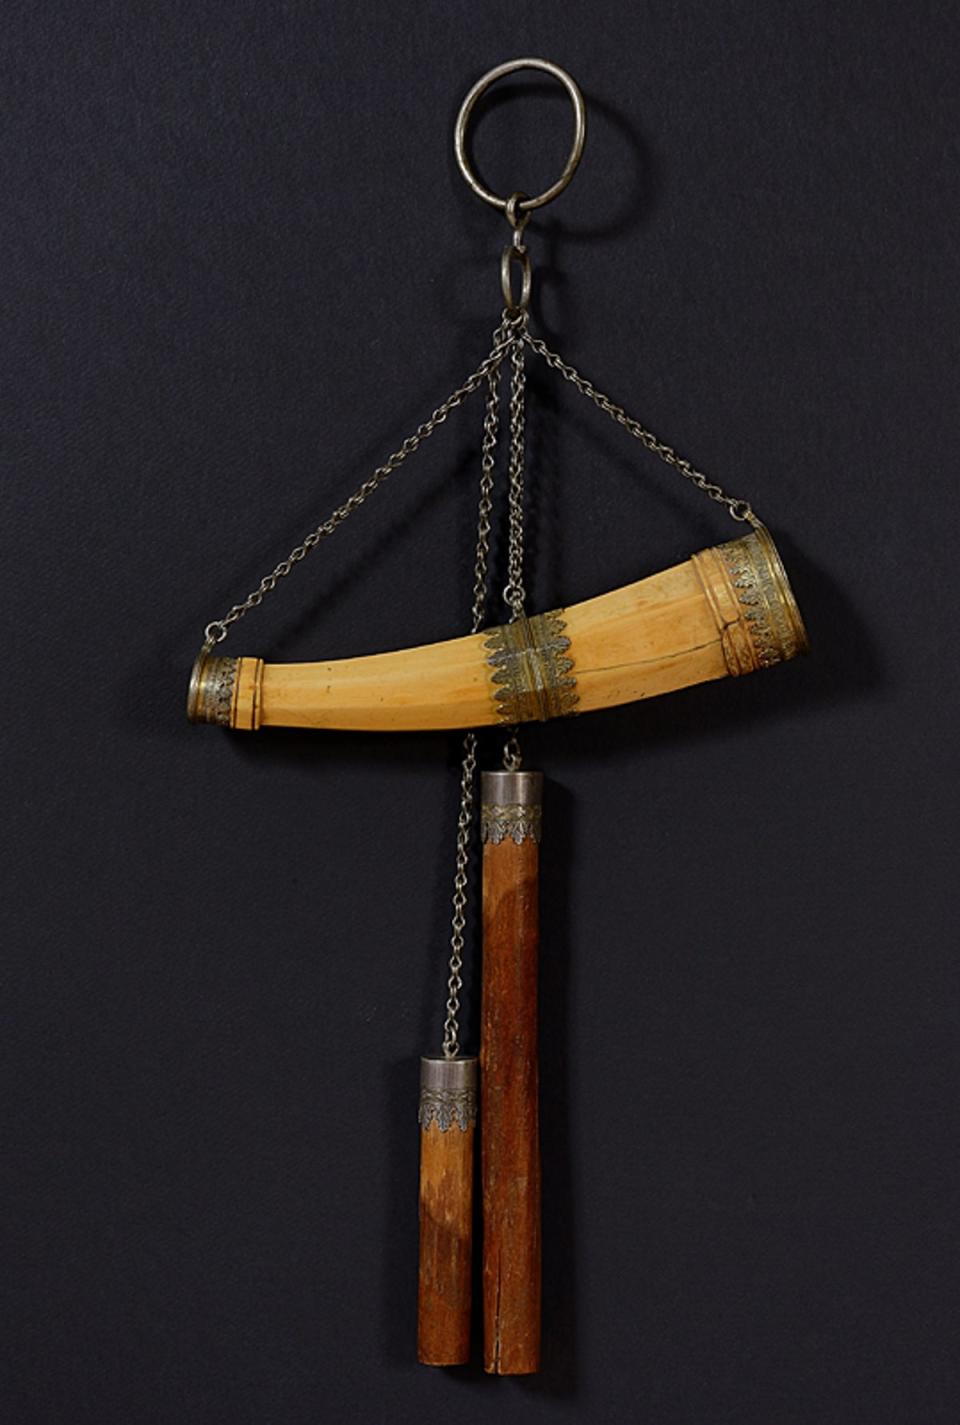 The horn with rods is thought to have been a gift to Francis from Sultan al-Kamil (Photographic archive of the Sacred Convent of S. Francesco in Assisi, Italy)